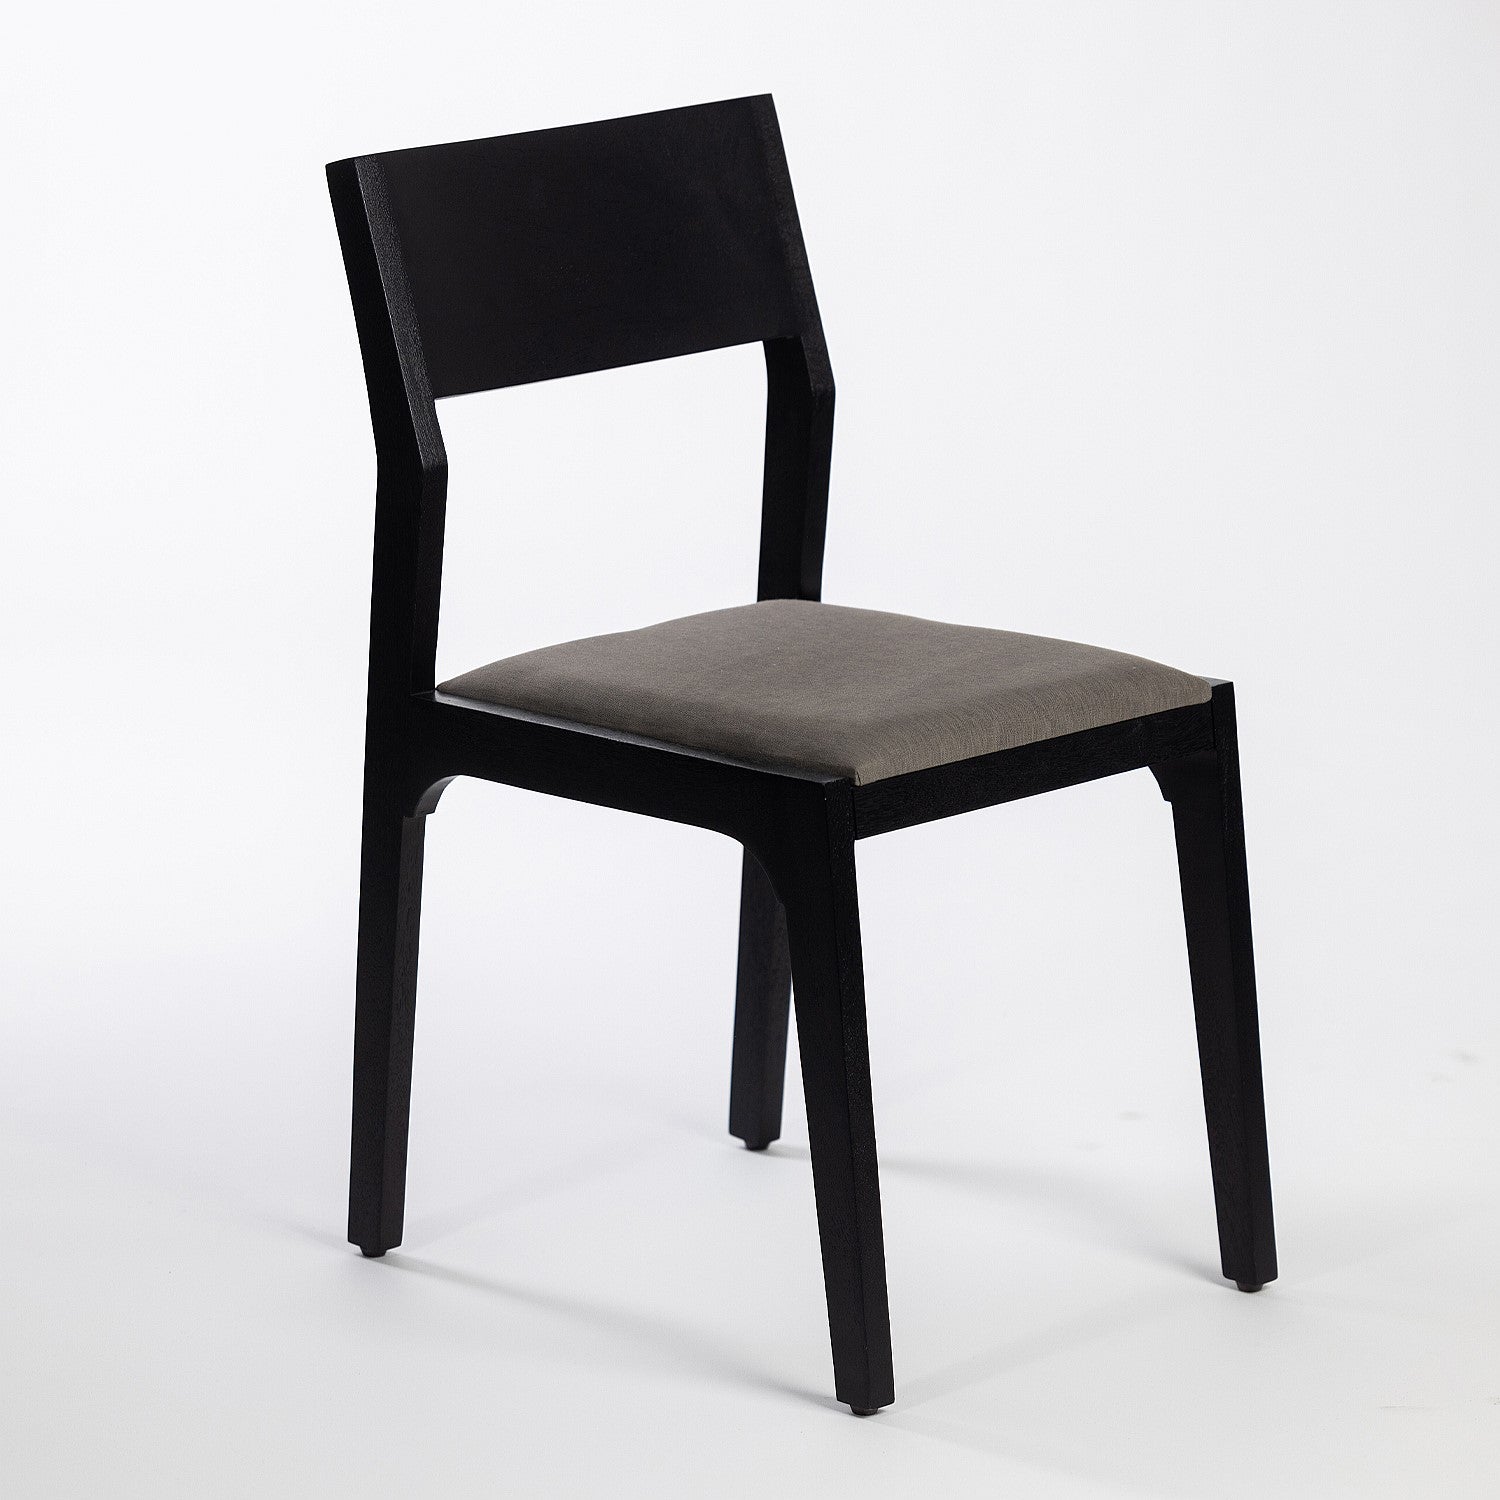 Linton dining chair